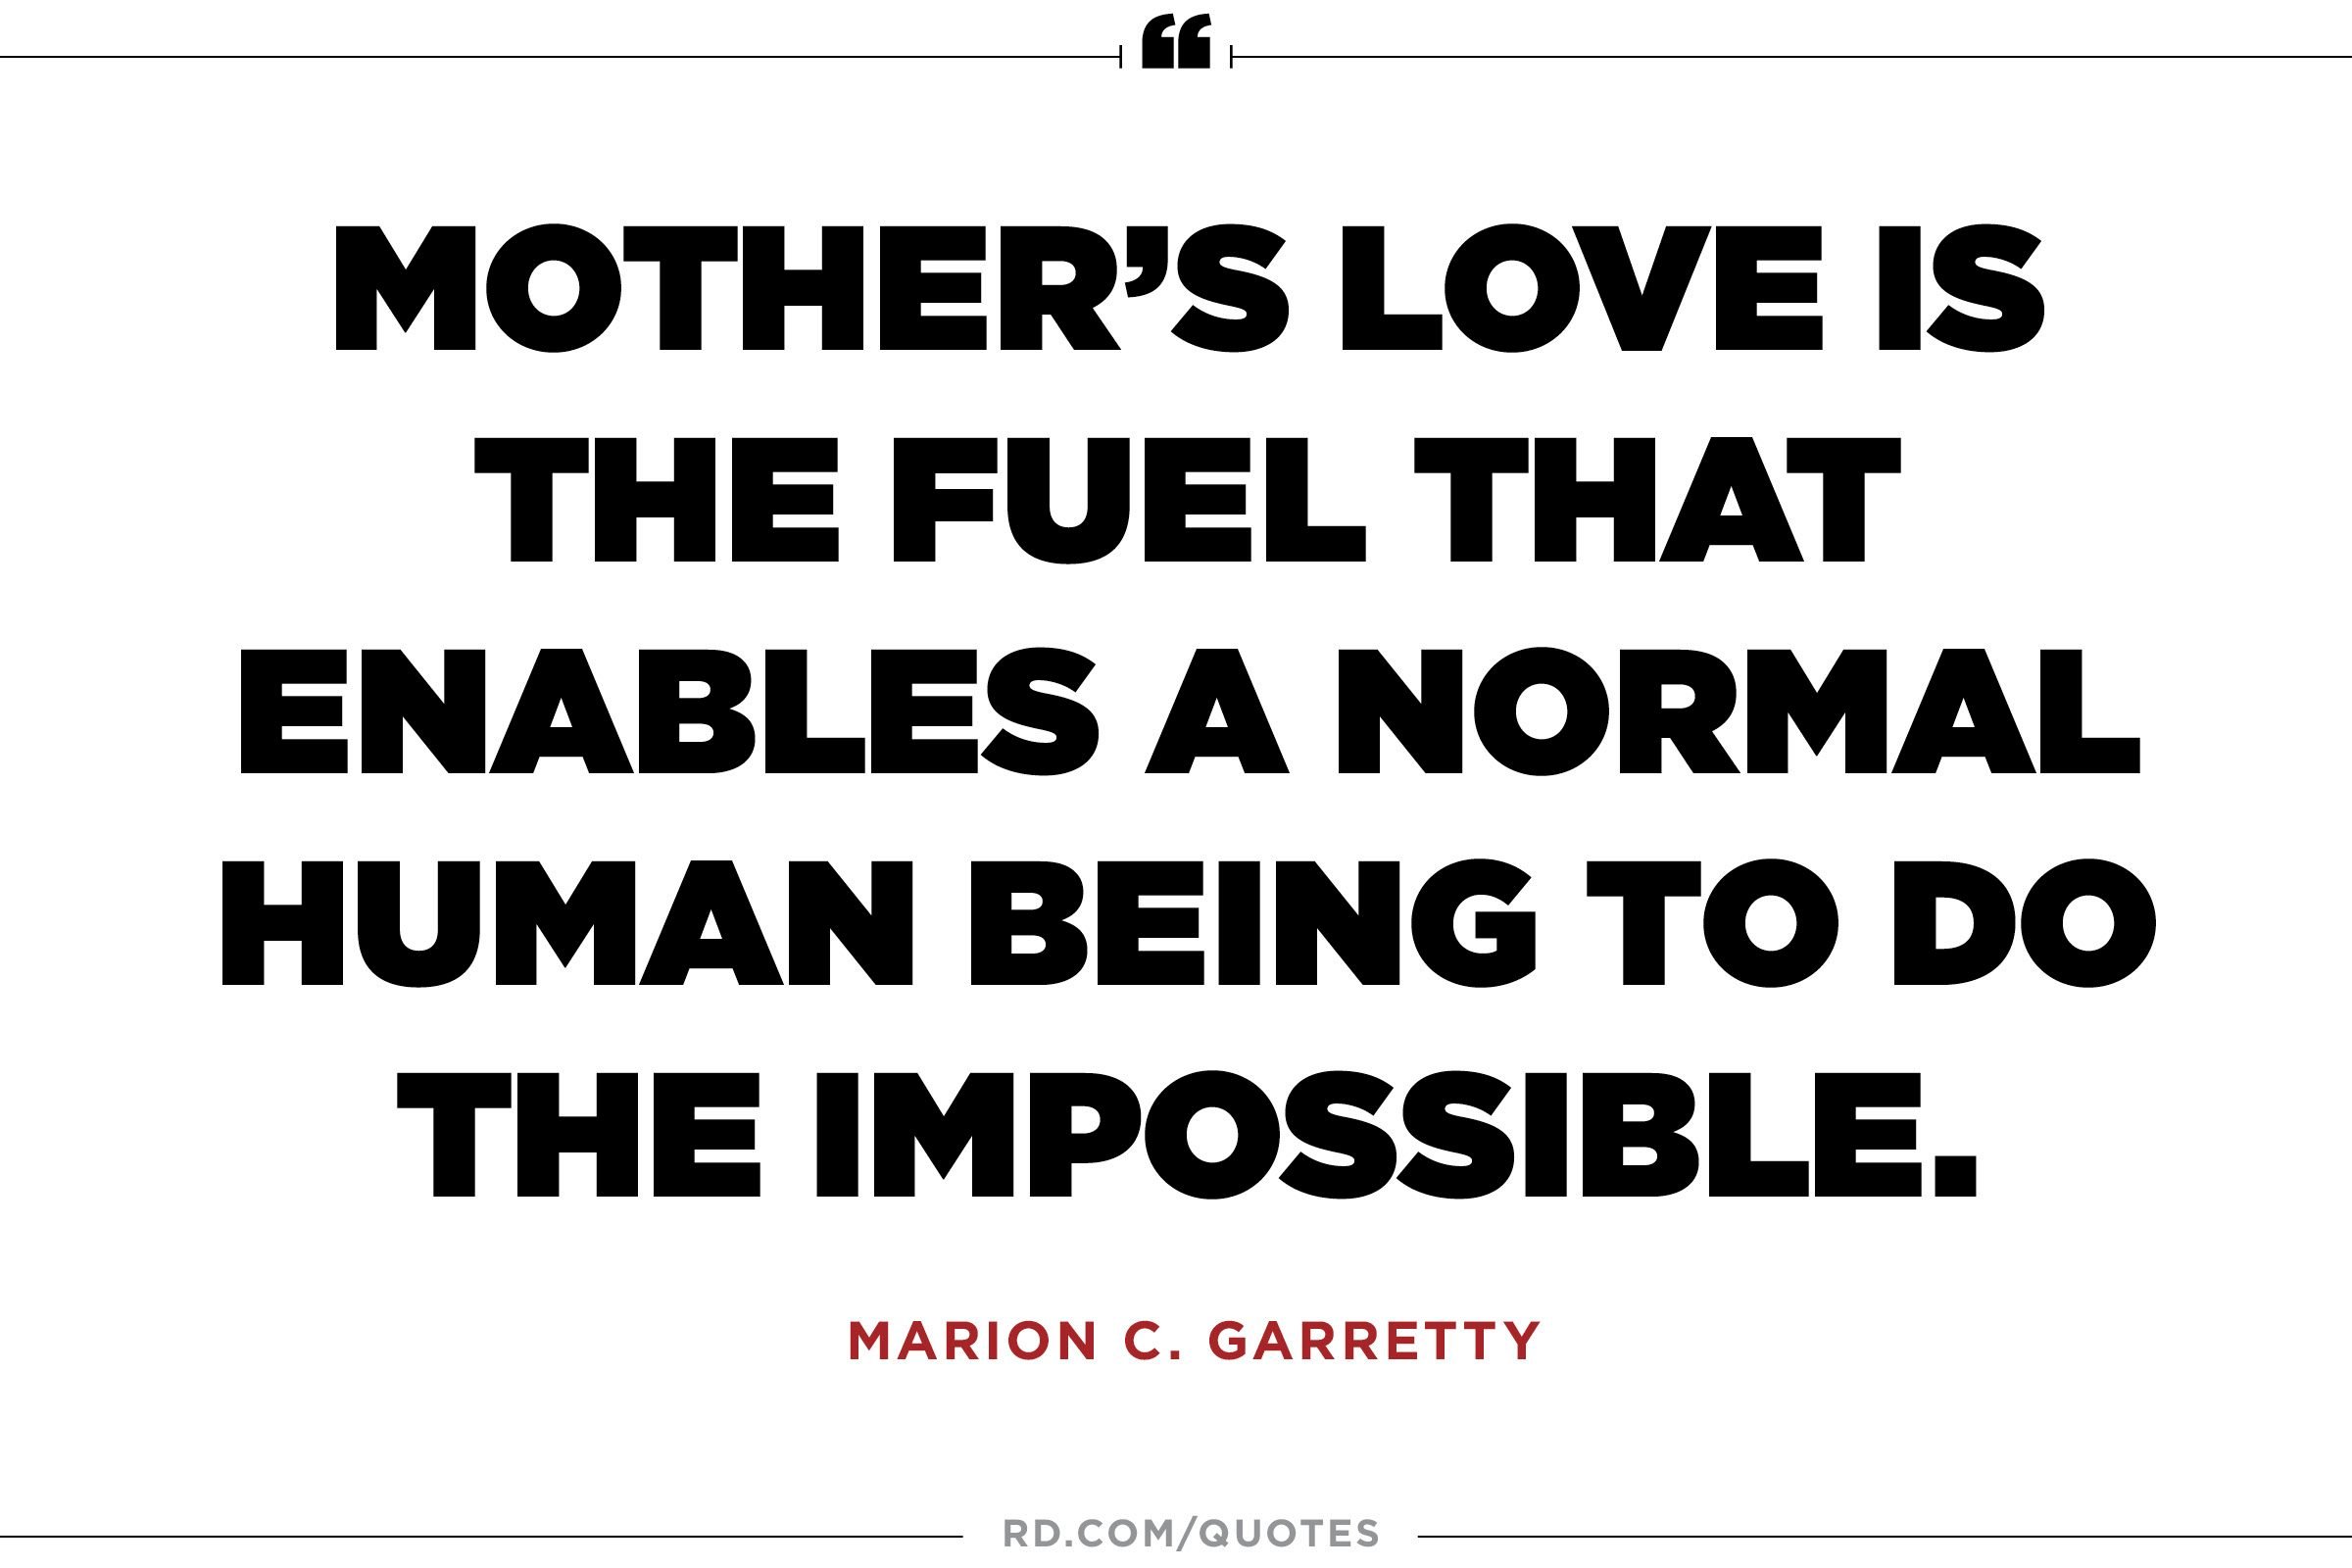 11 Quotes About Mothers That'll Make You Call Yours ...